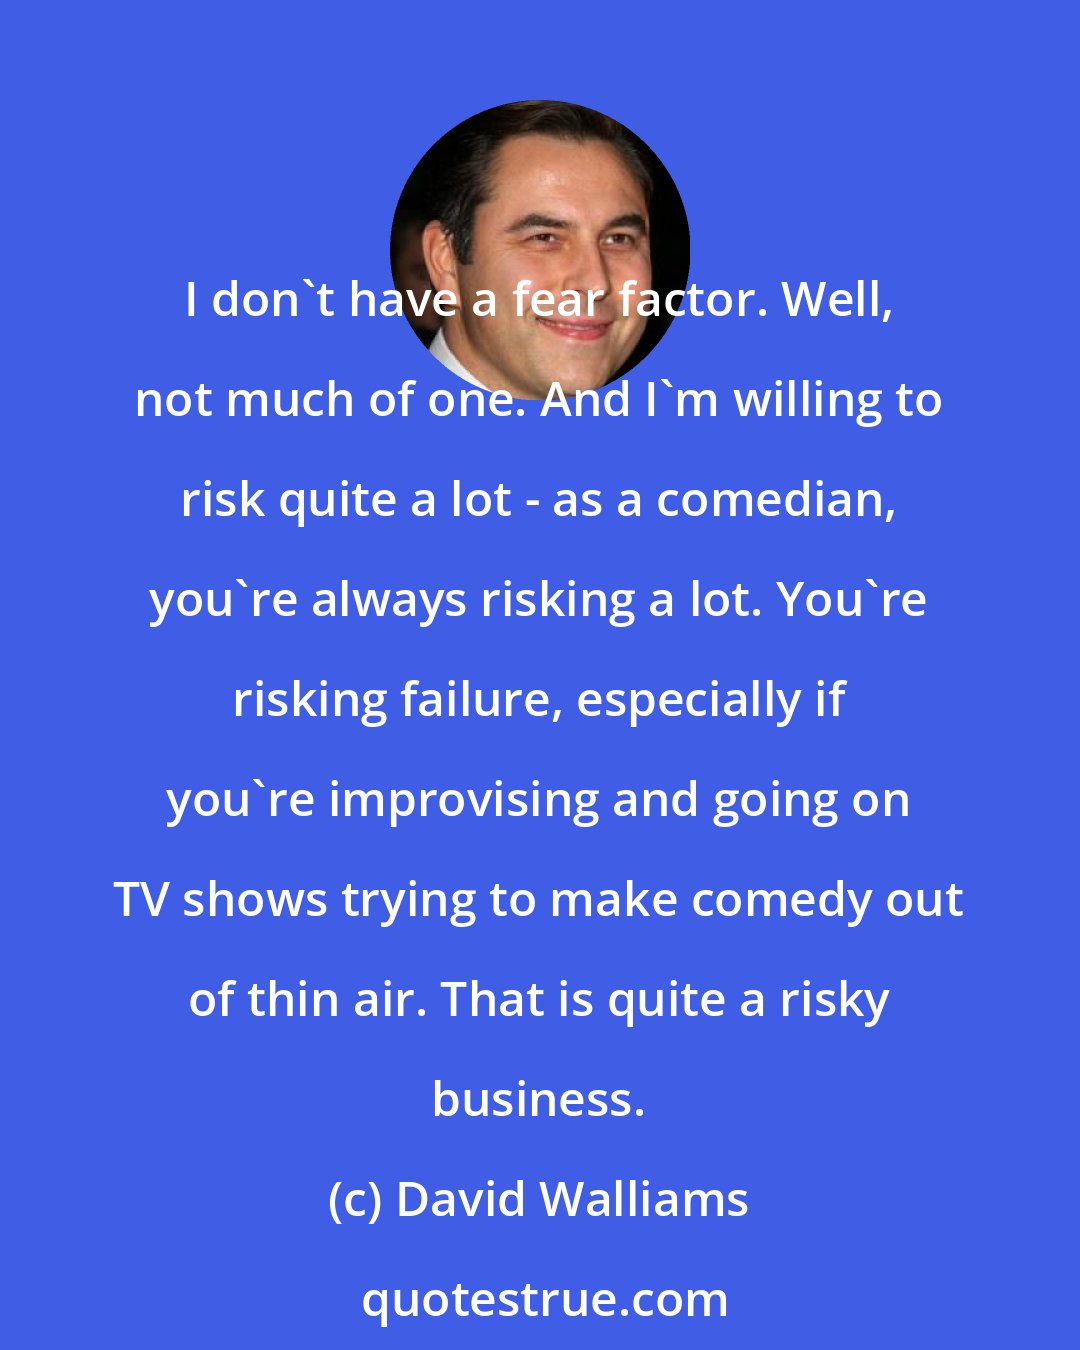 David Walliams: I don't have a fear factor. Well, not much of one. And I'm willing to risk quite a lot - as a comedian, you're always risking a lot. You're risking failure, especially if you're improvising and going on TV shows trying to make comedy out of thin air. That is quite a risky business.